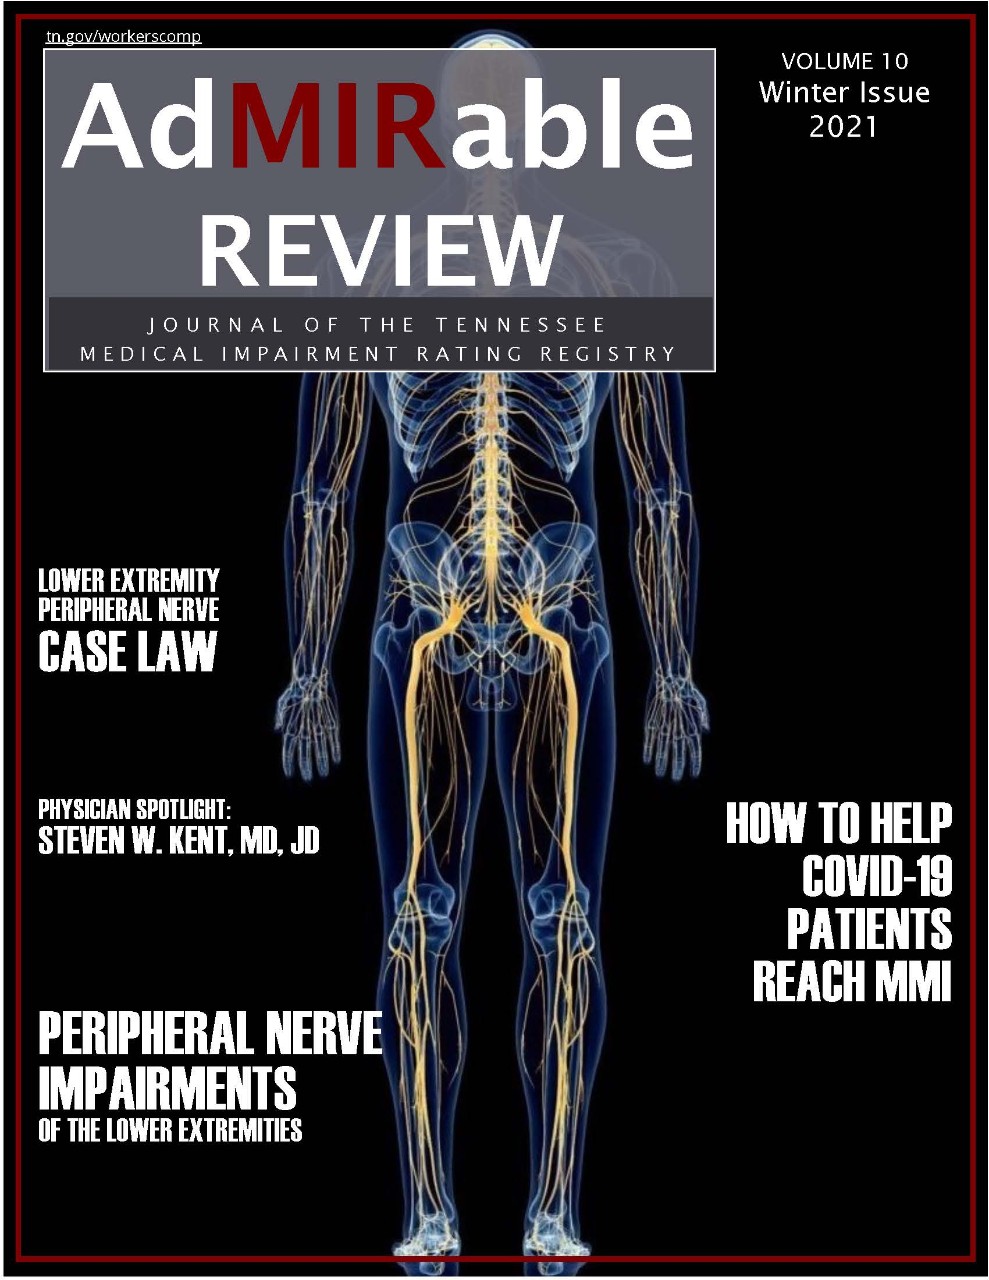 Cover image to the Winter 2021 AdMIRable Review issue